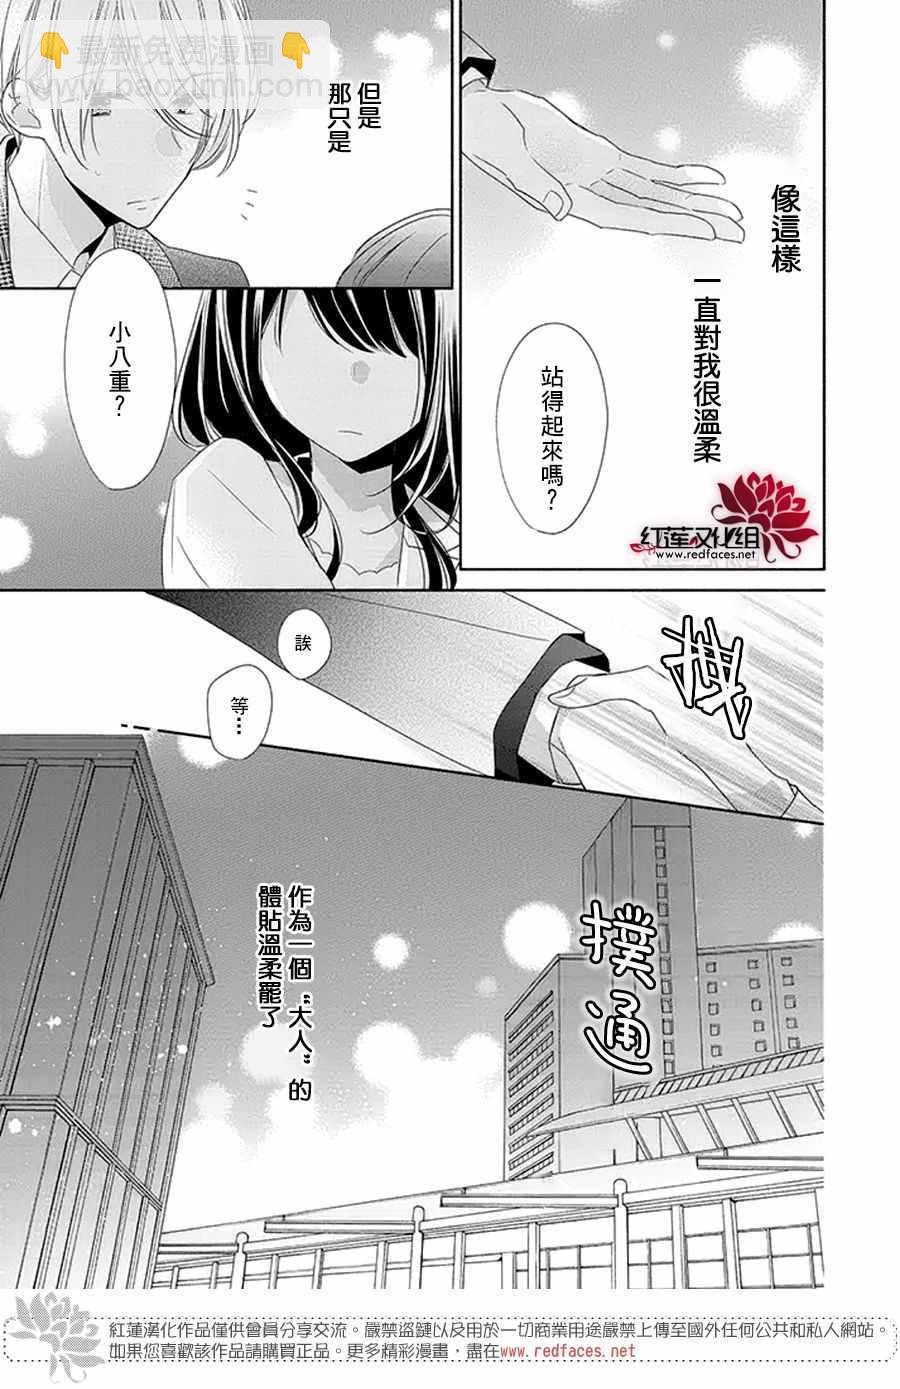 If given a second chance - 20話 - 5